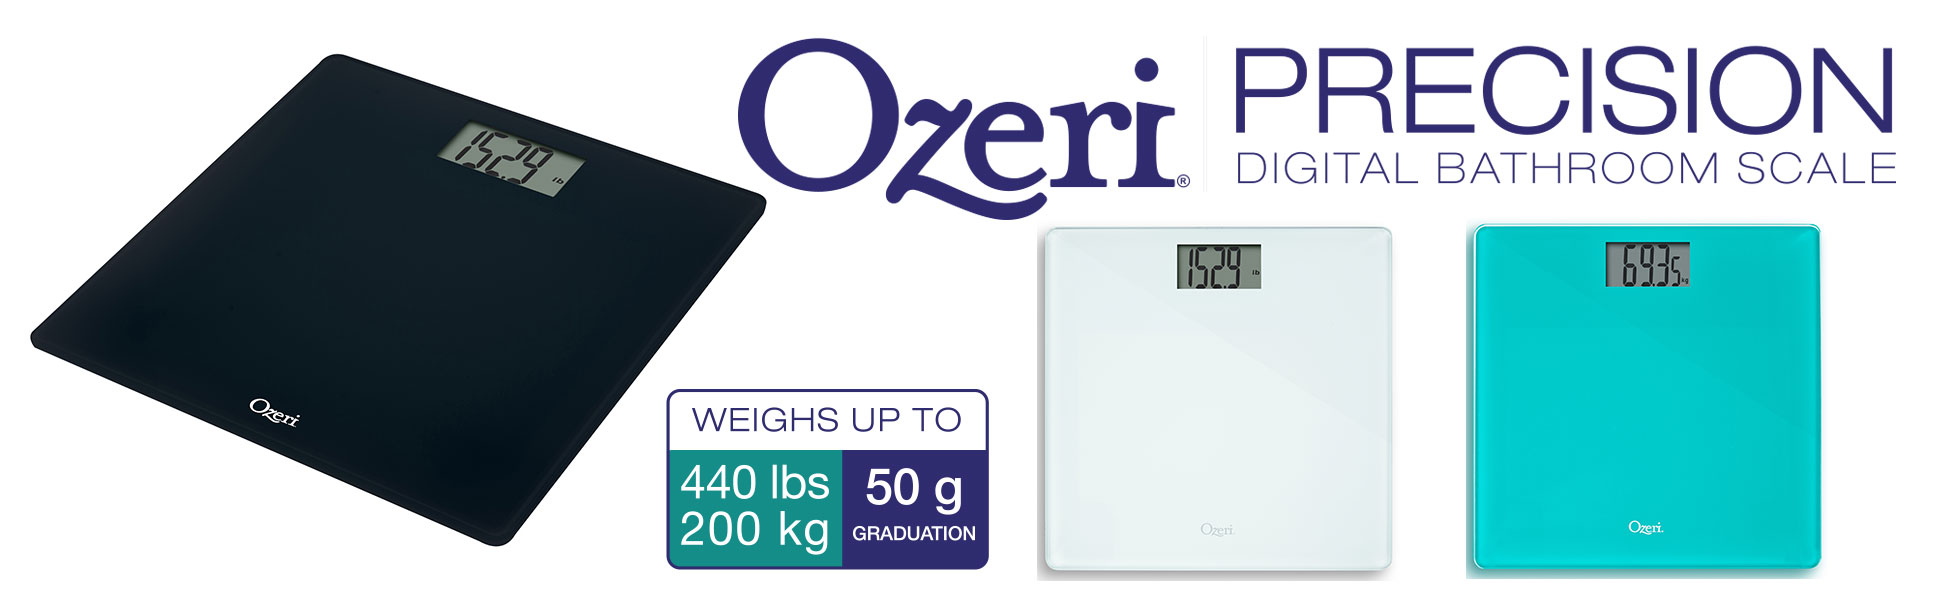 Ozeri Precision Bath Scale (440 lbs / 200 kg) in Tempered Glass, with 50 Gram Sensor Technology (0.1 lbs / 0.05 kg) and Infant, Pet & Luggage Tare